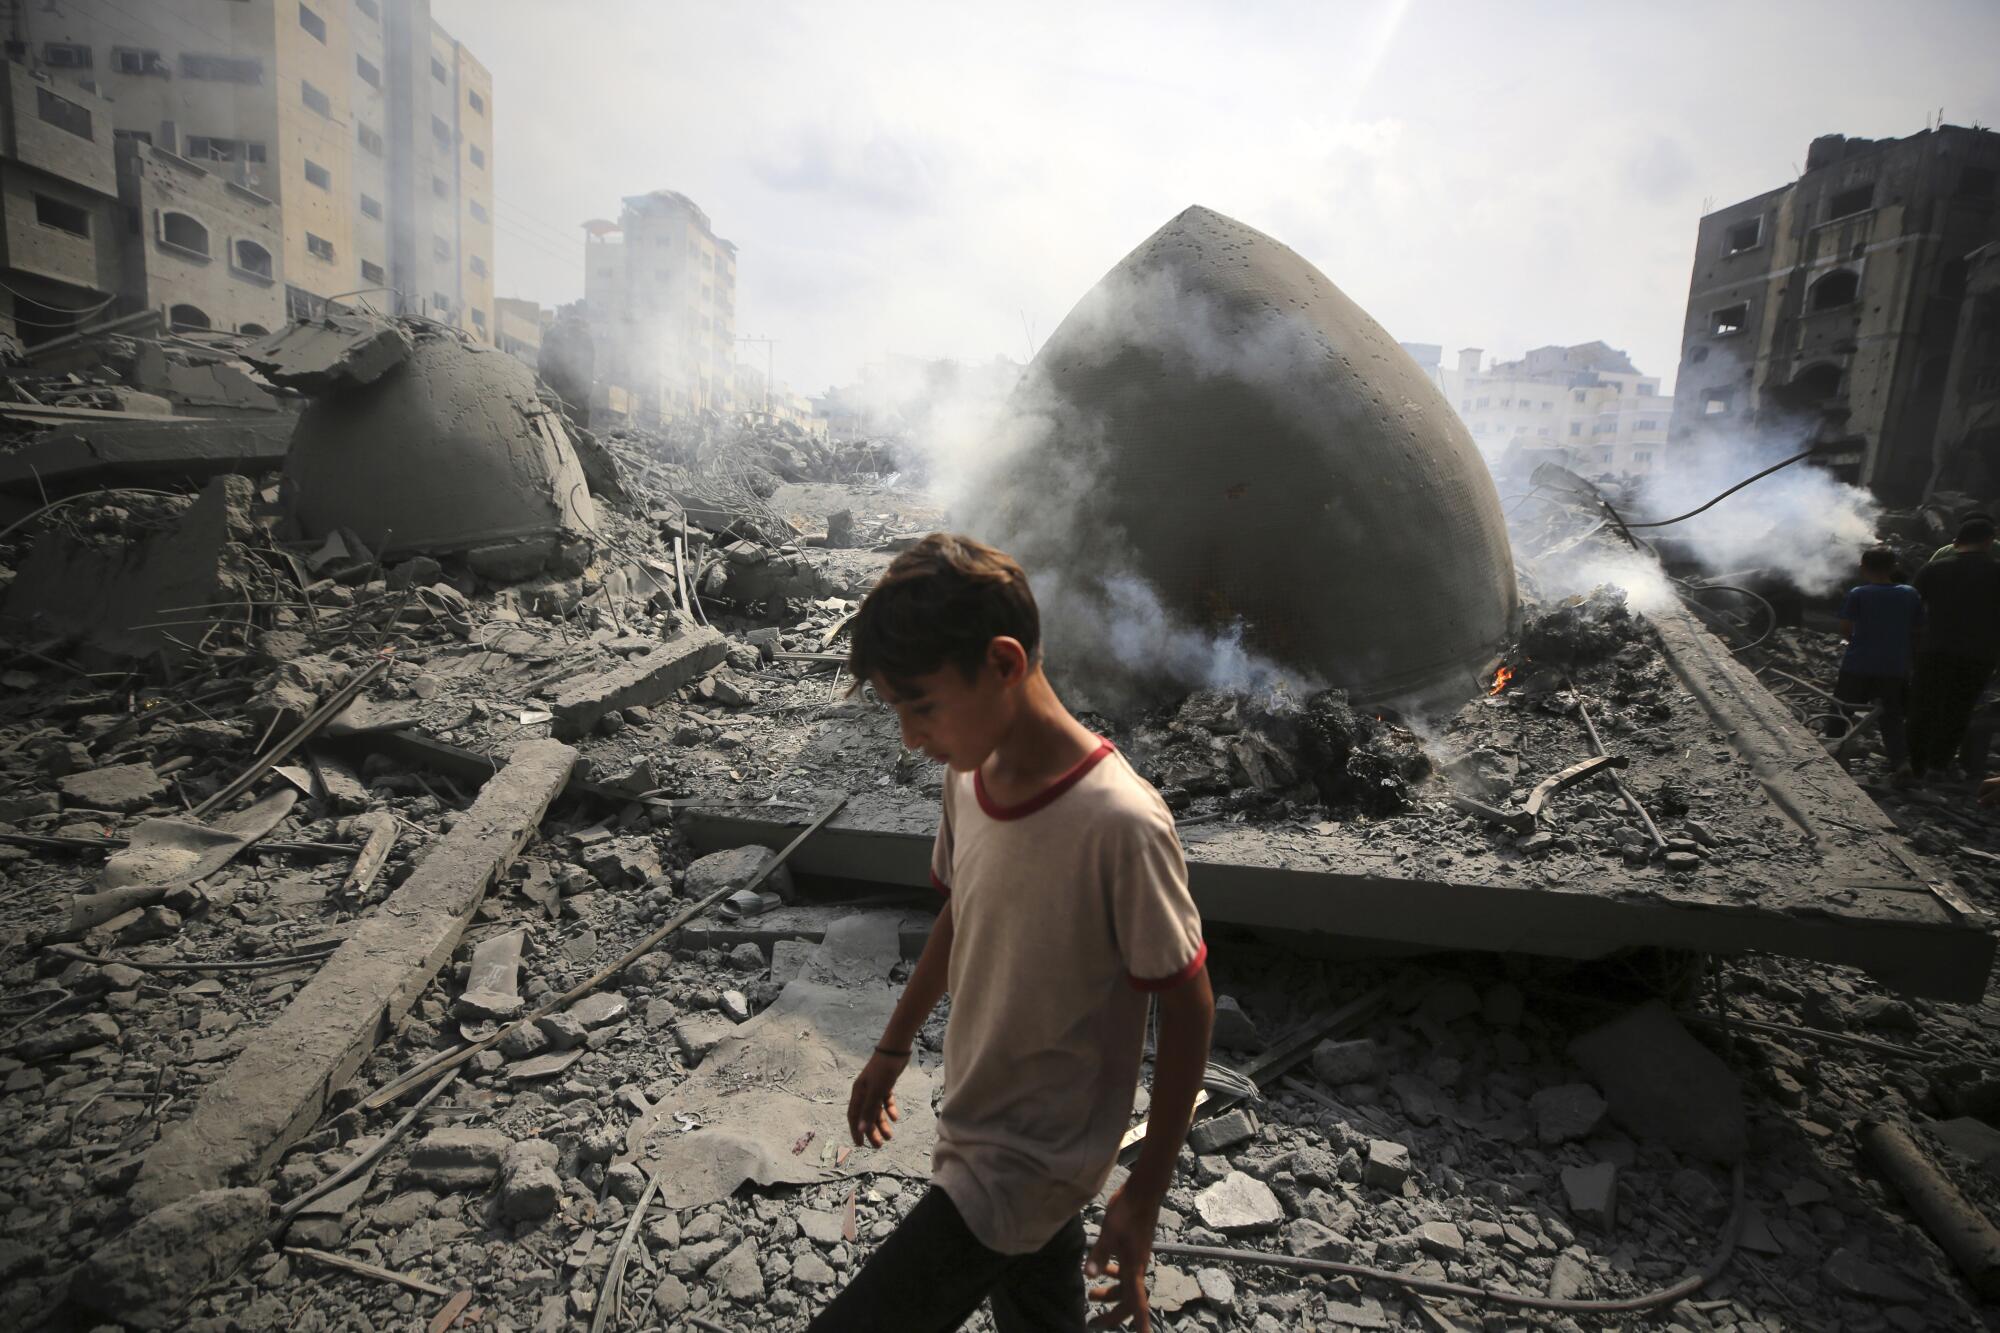 A person walks amid rubble and the smoking remains of a building 